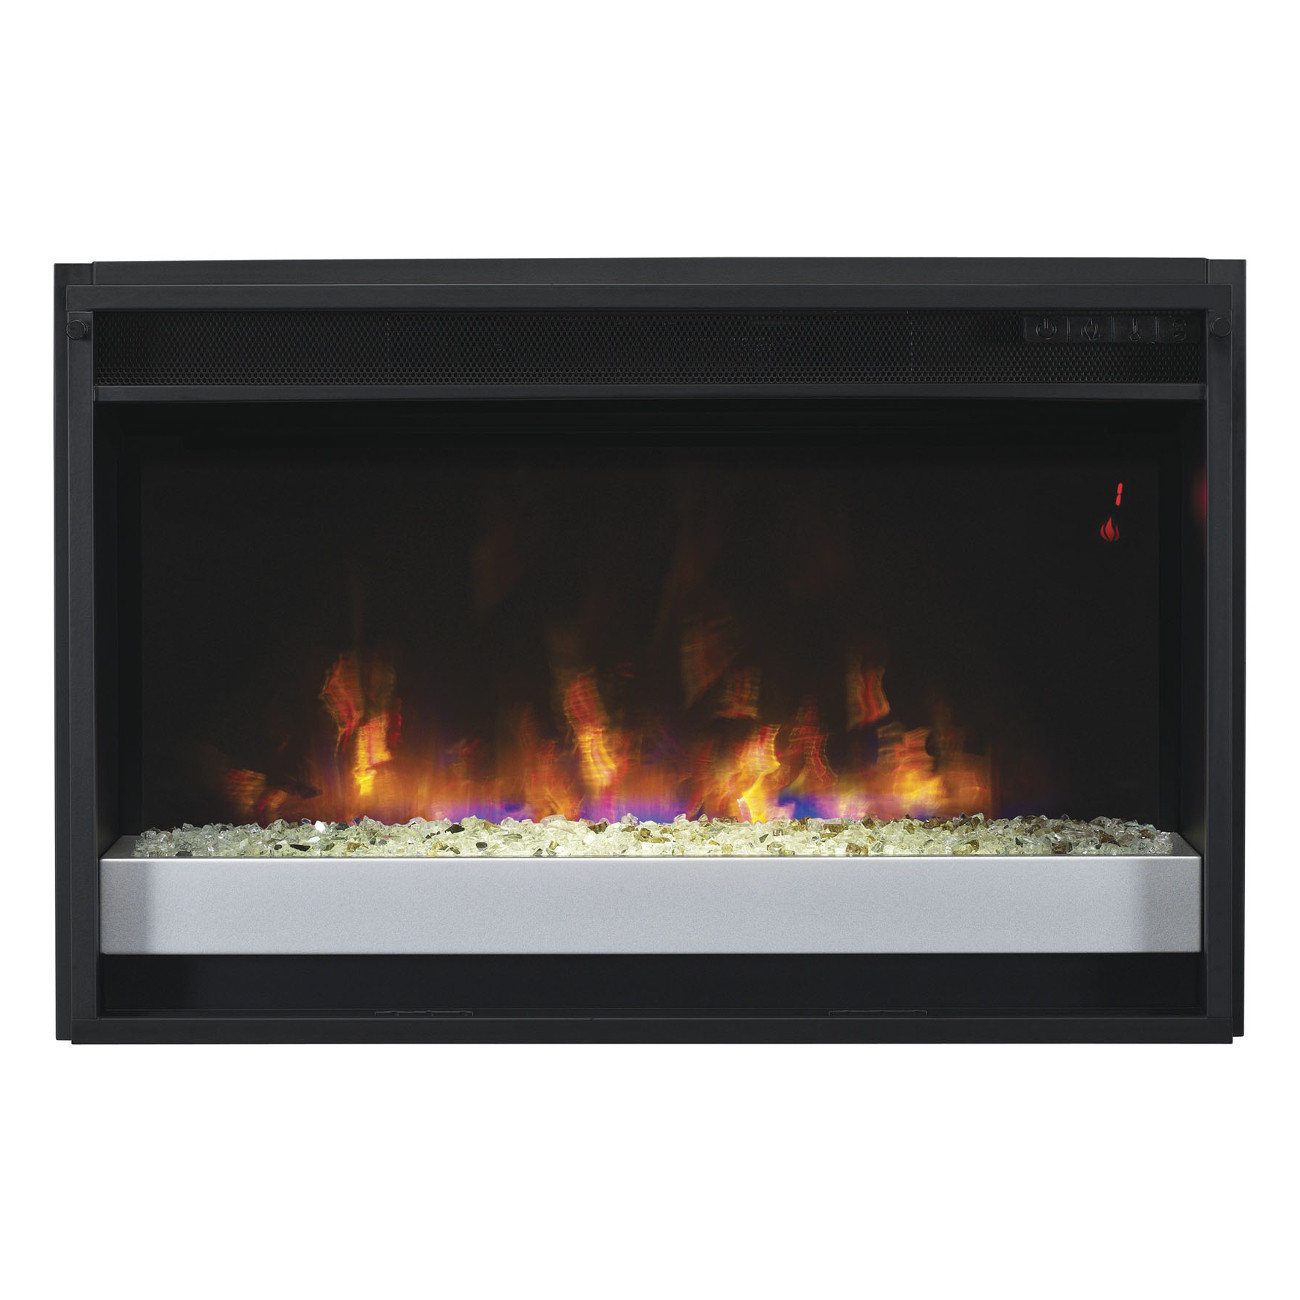 Classic Flame Electric Fireplace Insert
 Classic Flame 27" Electric Fireplace Insert 26EF031GPG 201